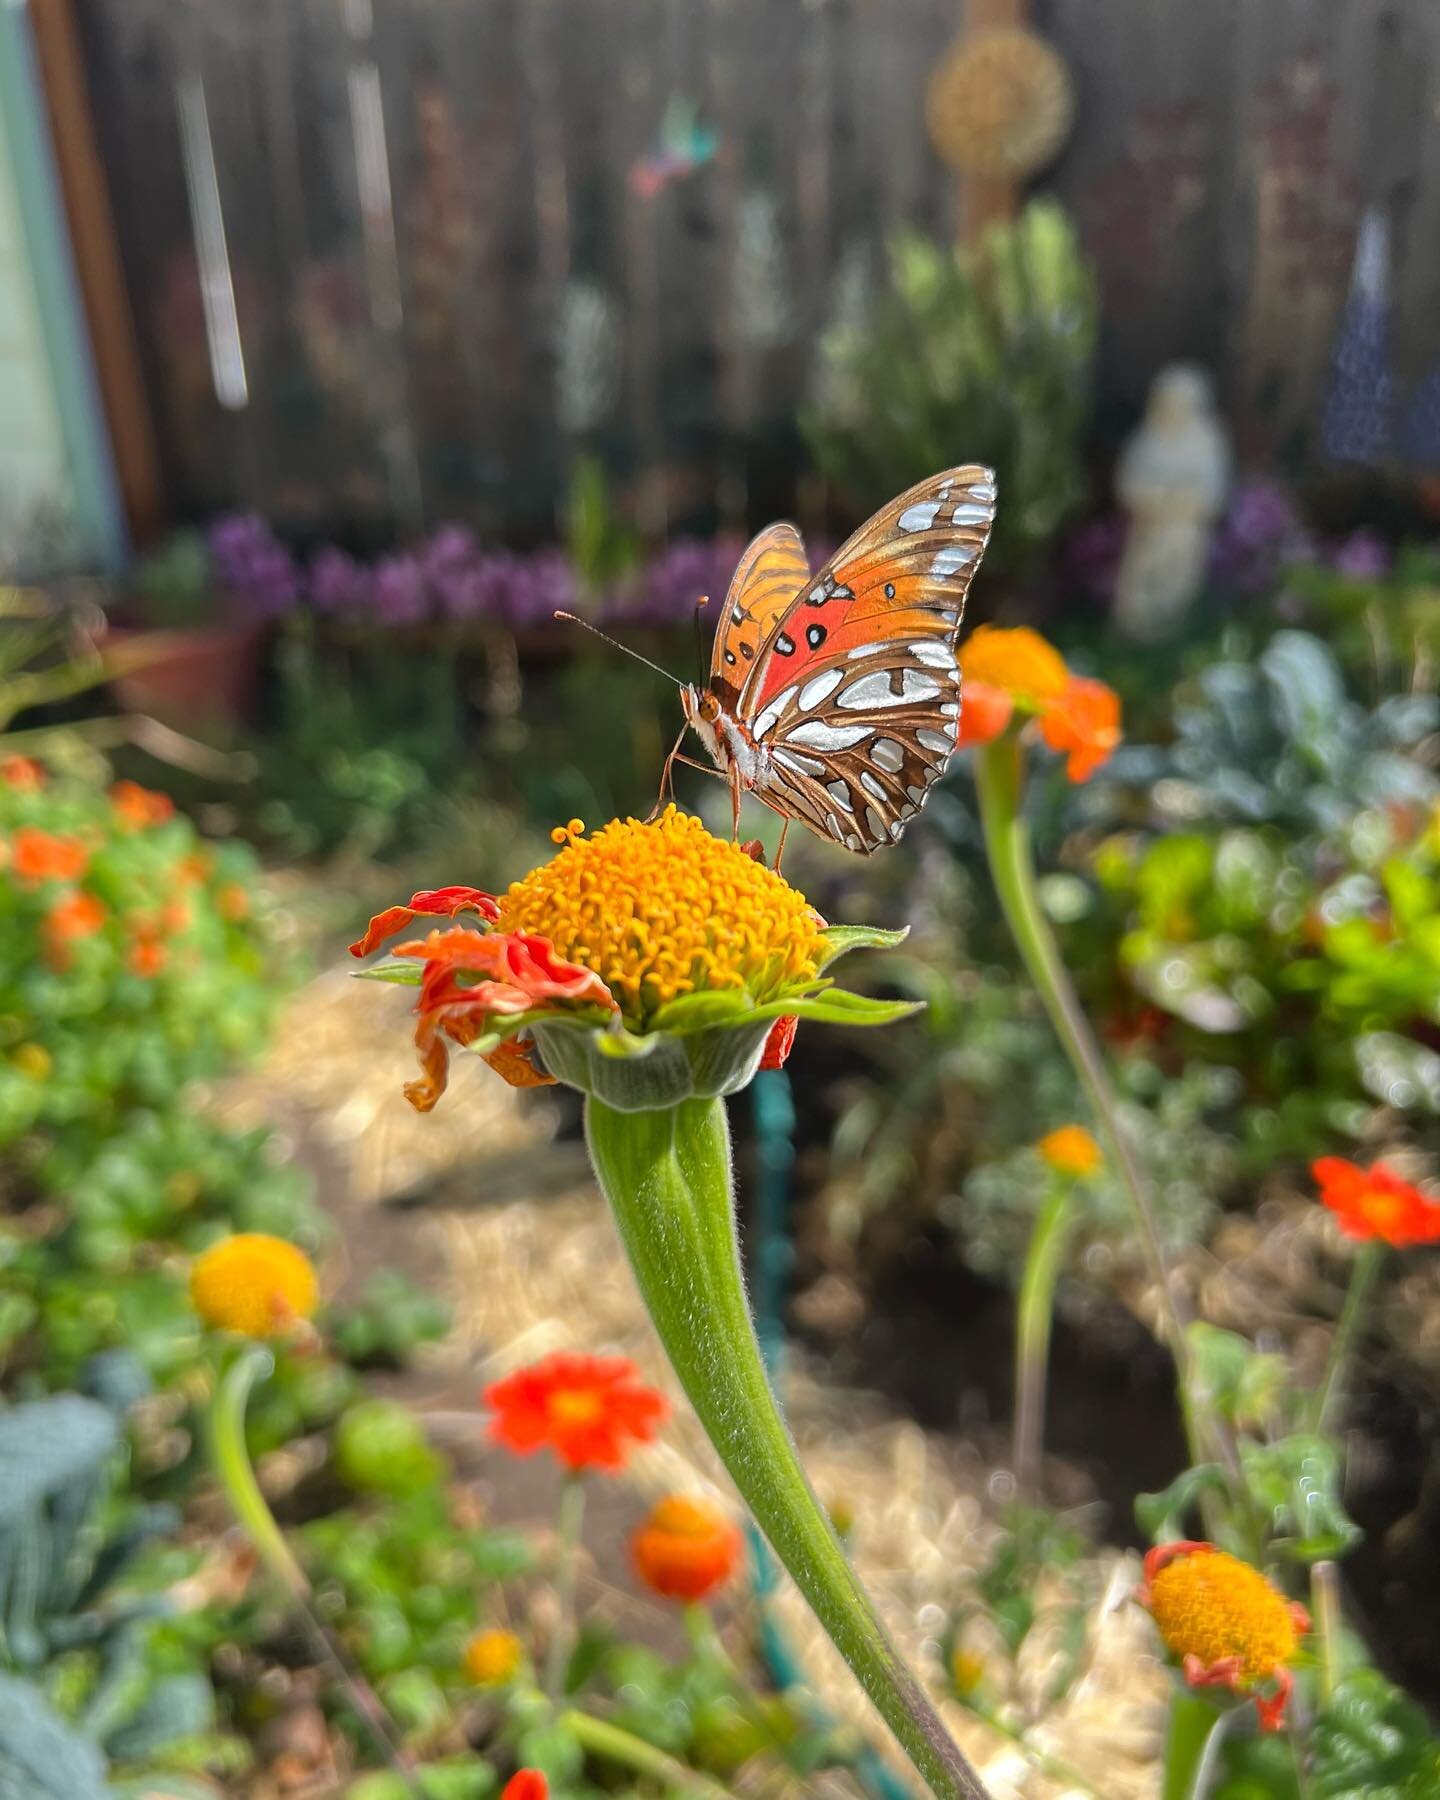 The butterflies have returned to the garden 🦋 This one perched on this Mexican sunflower to drink its sweet nectar. #urbangarden #sf #butterfly #nectar #garden